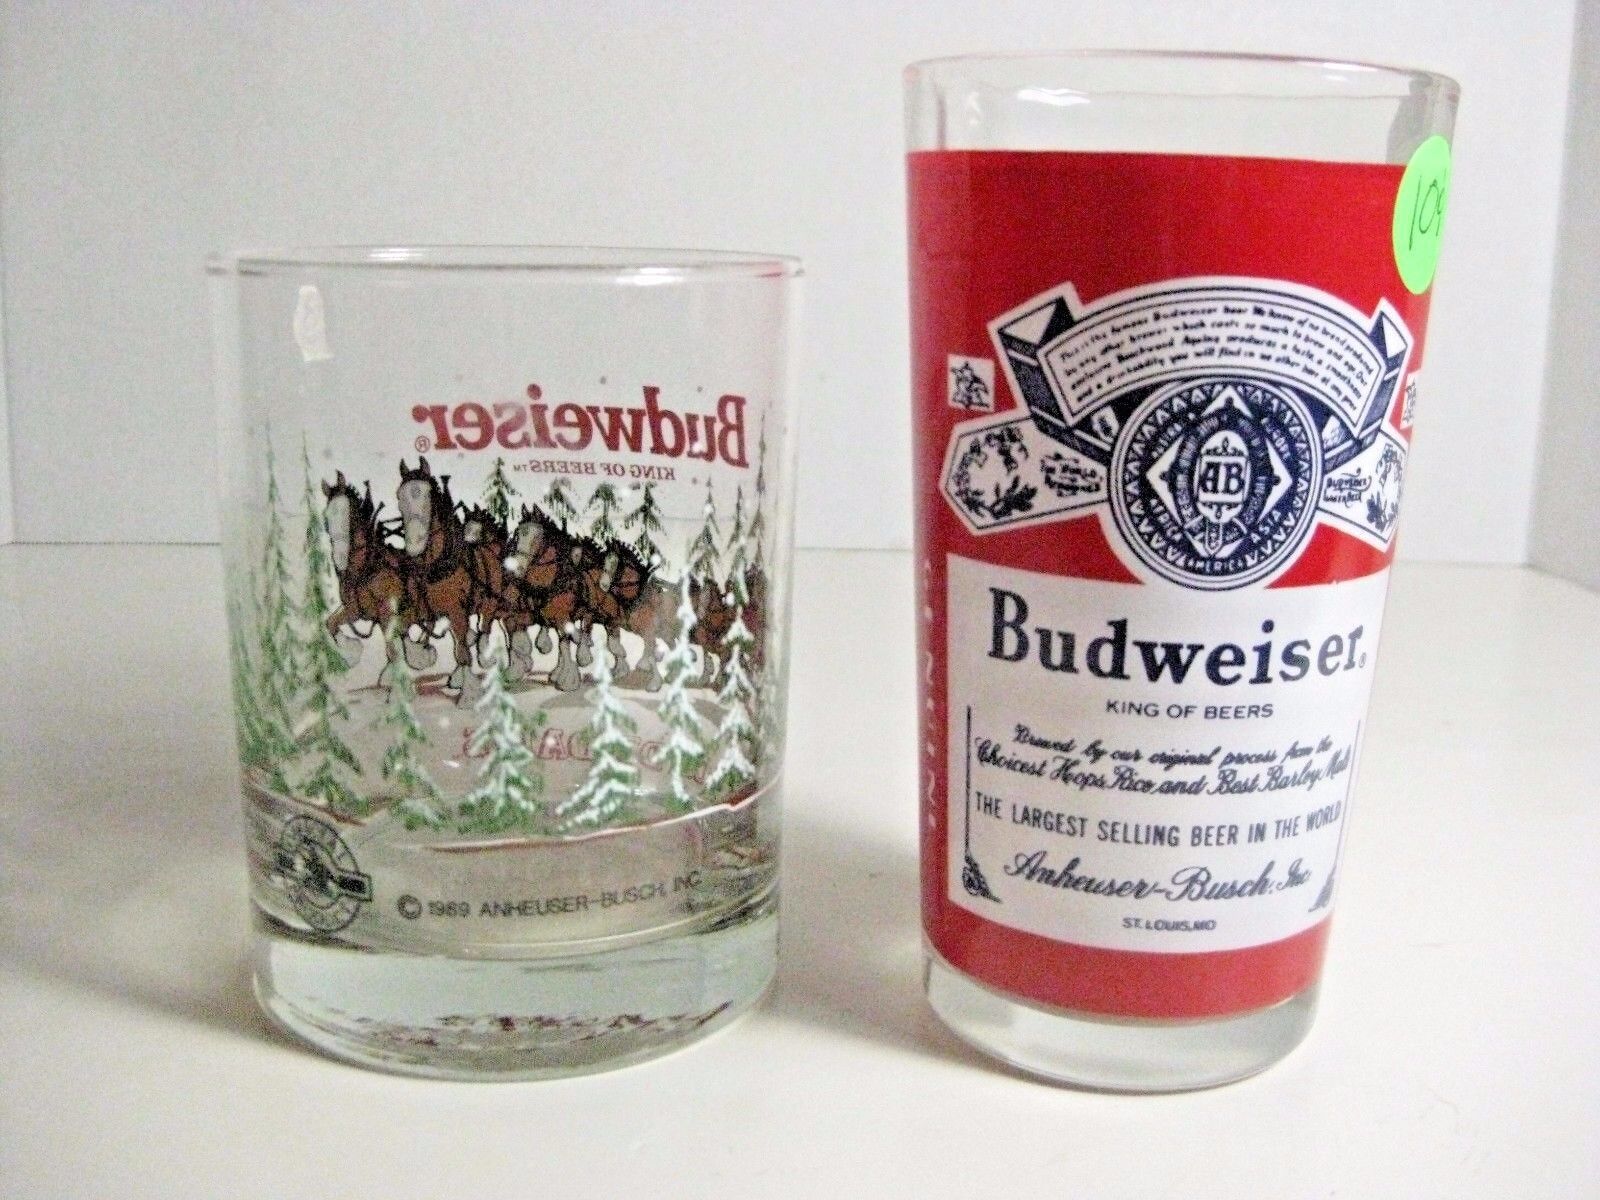  BUDWEISER BEER GLASSES ONE IS 1989 CLYDESDALES  BAR WARE 2 DIFFERENT TYPES Budweiser - фотография #2